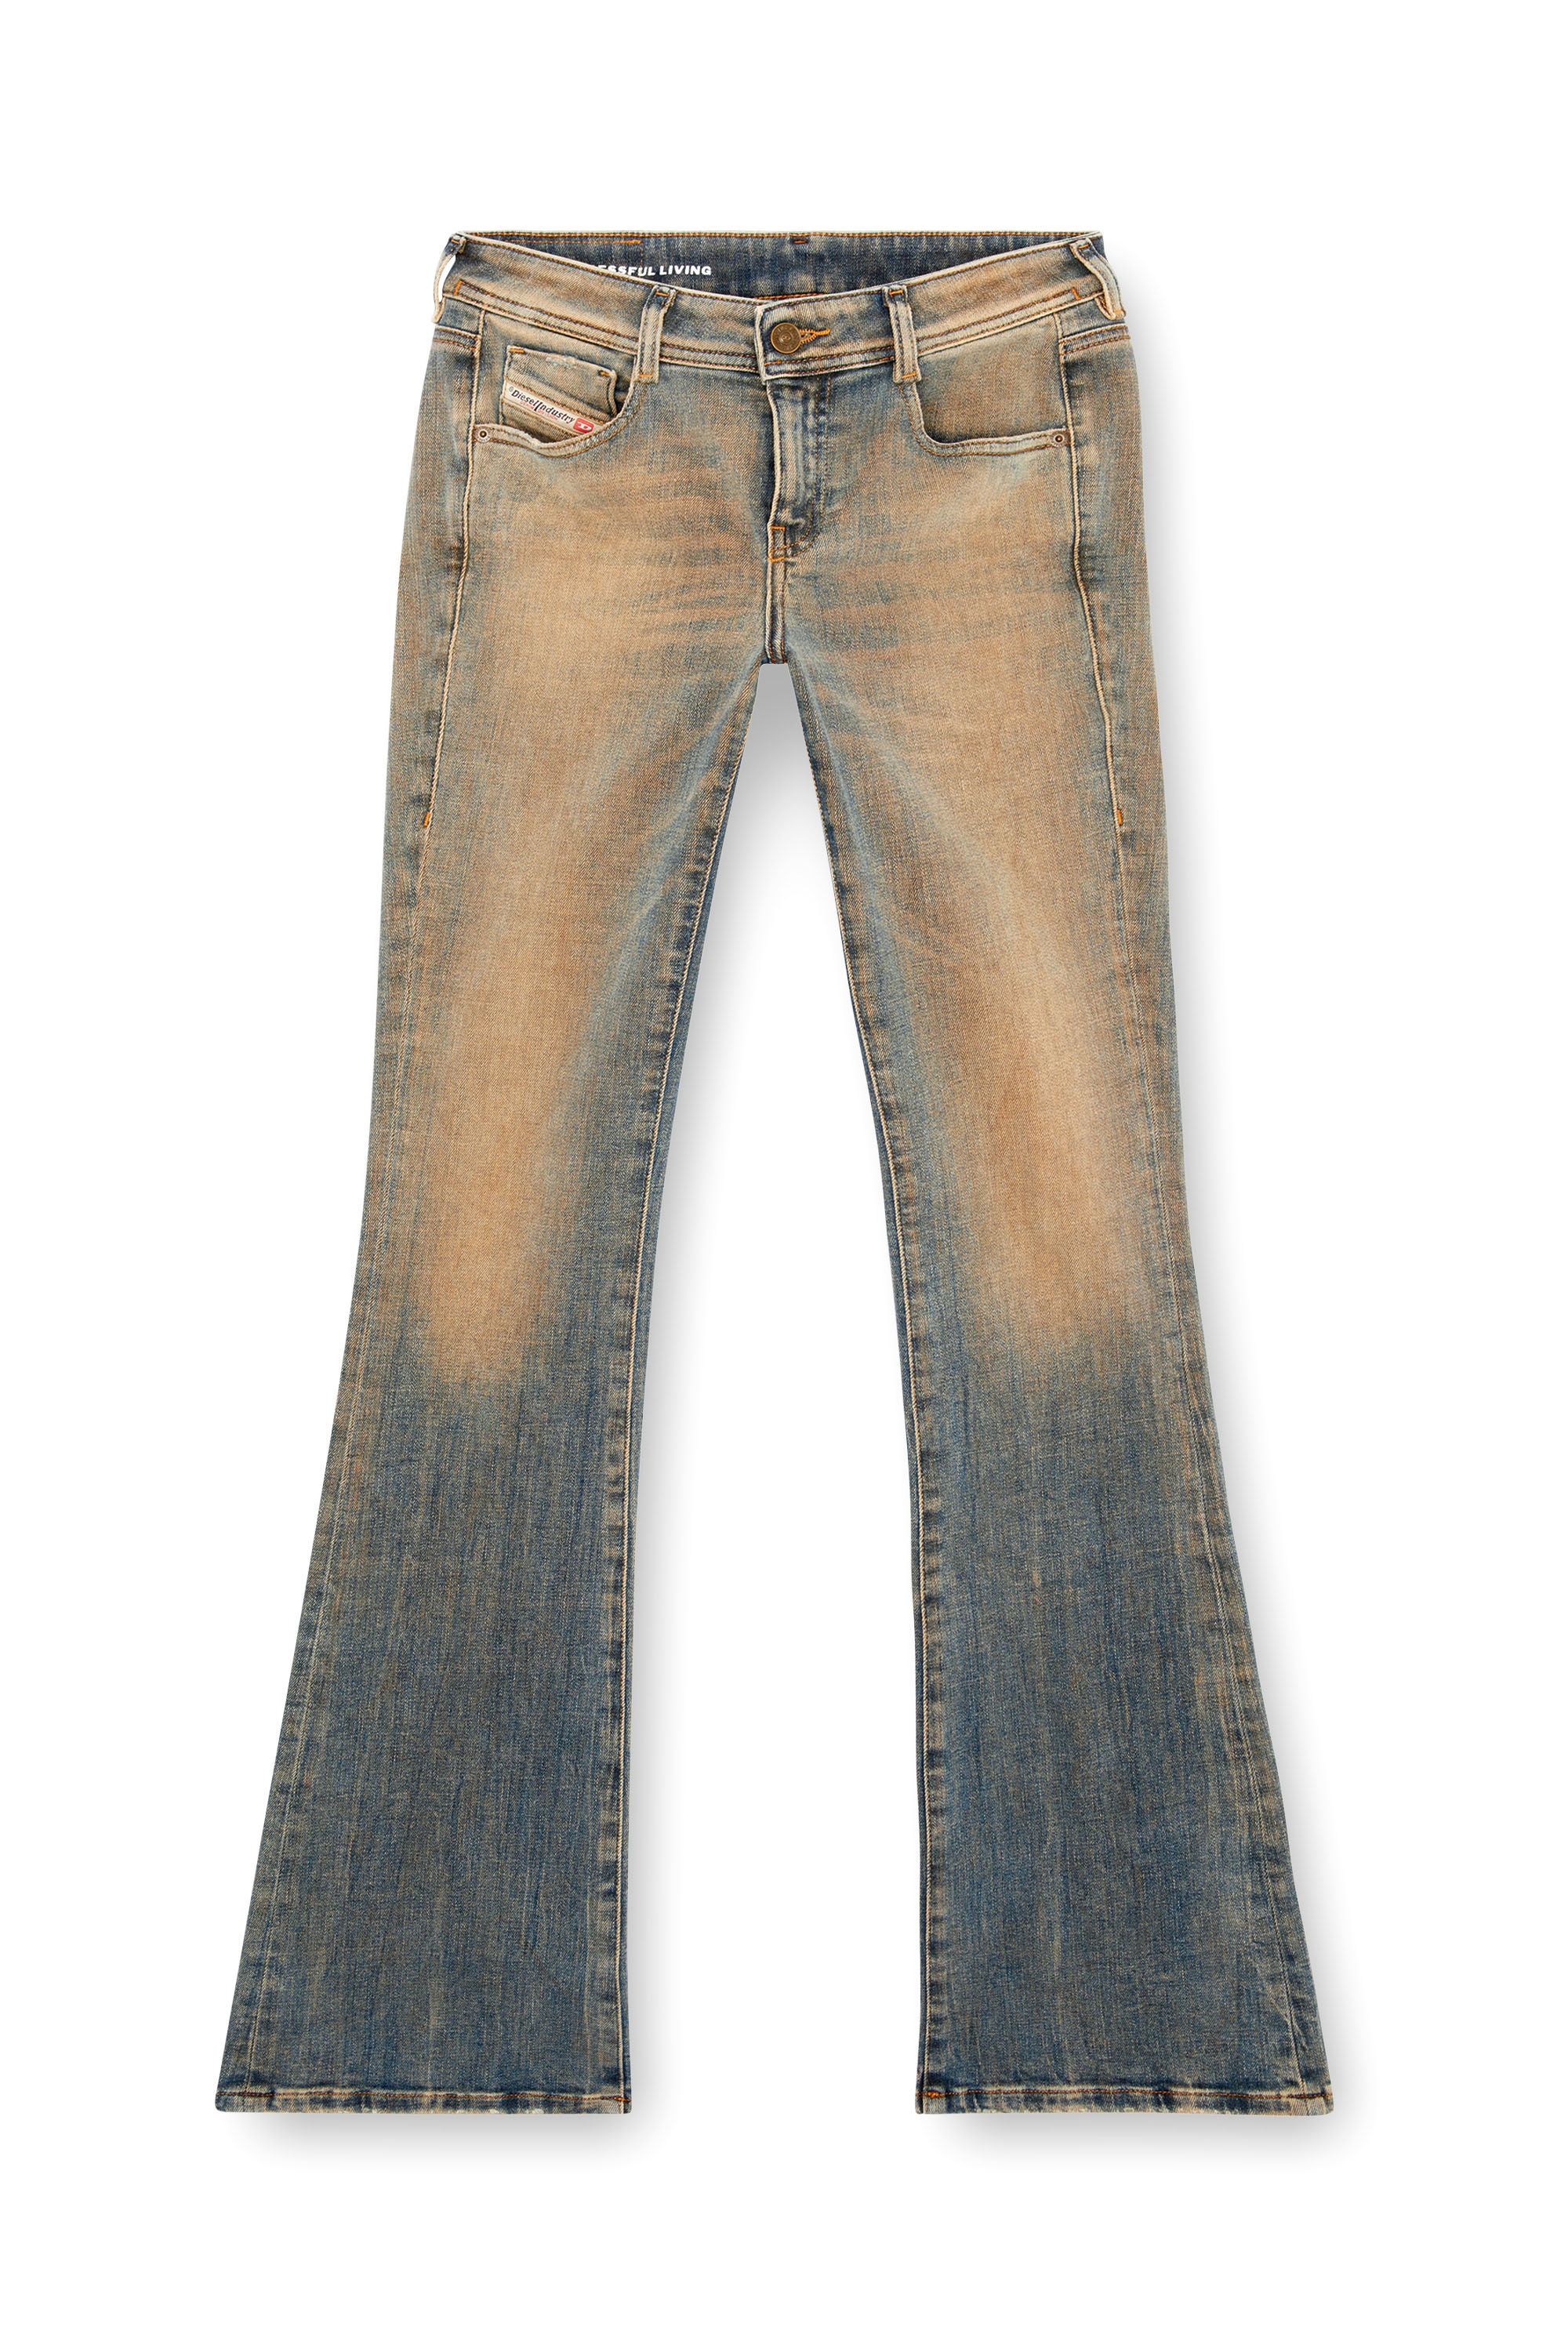 Diesel - Bootcut and Flare Jeans 1969 D-Ebbey 09J23, Mujer Bootcut y Flare Jeans - 1969 D-Ebbey in Azul marino - Image 3